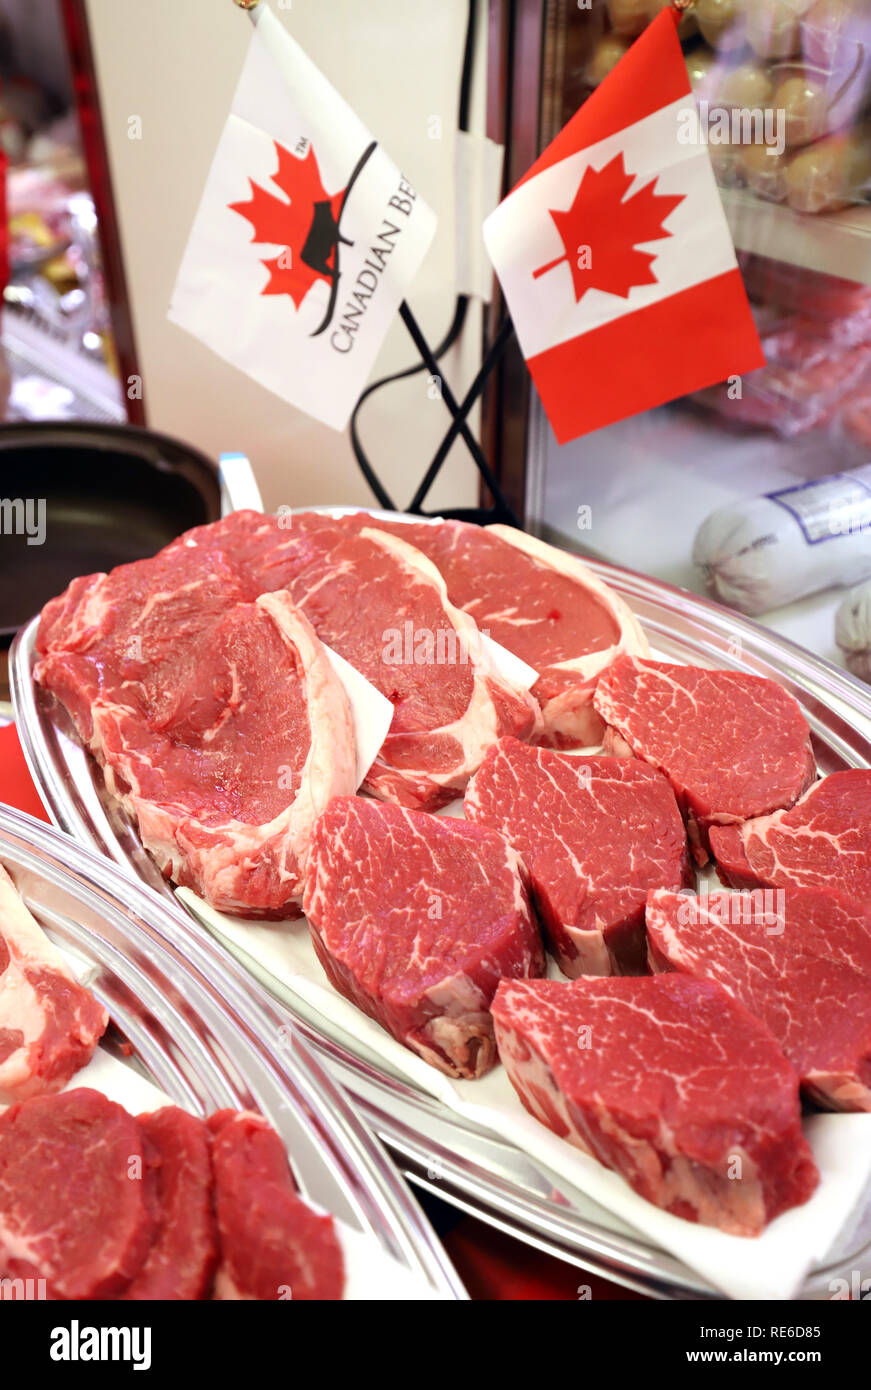 Tokyo, Japan. 20th Jan, 2019. Sliced Canadian beef are displayed on a dish for tasting at the Nissin World Delicatessen supermarket in Tokyo as Japan's tariff of imported beef will be reduced from 38.5 percent to 9 percent in 16 years on Sunday, January 20, 2019. Canadian International Trade Minister James Carr is now here to attend the first ministerial meeting of the Comprehensive and Progressive Agreement for Trans-Pacific Partnership (CPTPP). Credit: Yoshio Tsunoda/AFLO/Alamy Live News Stock Photo